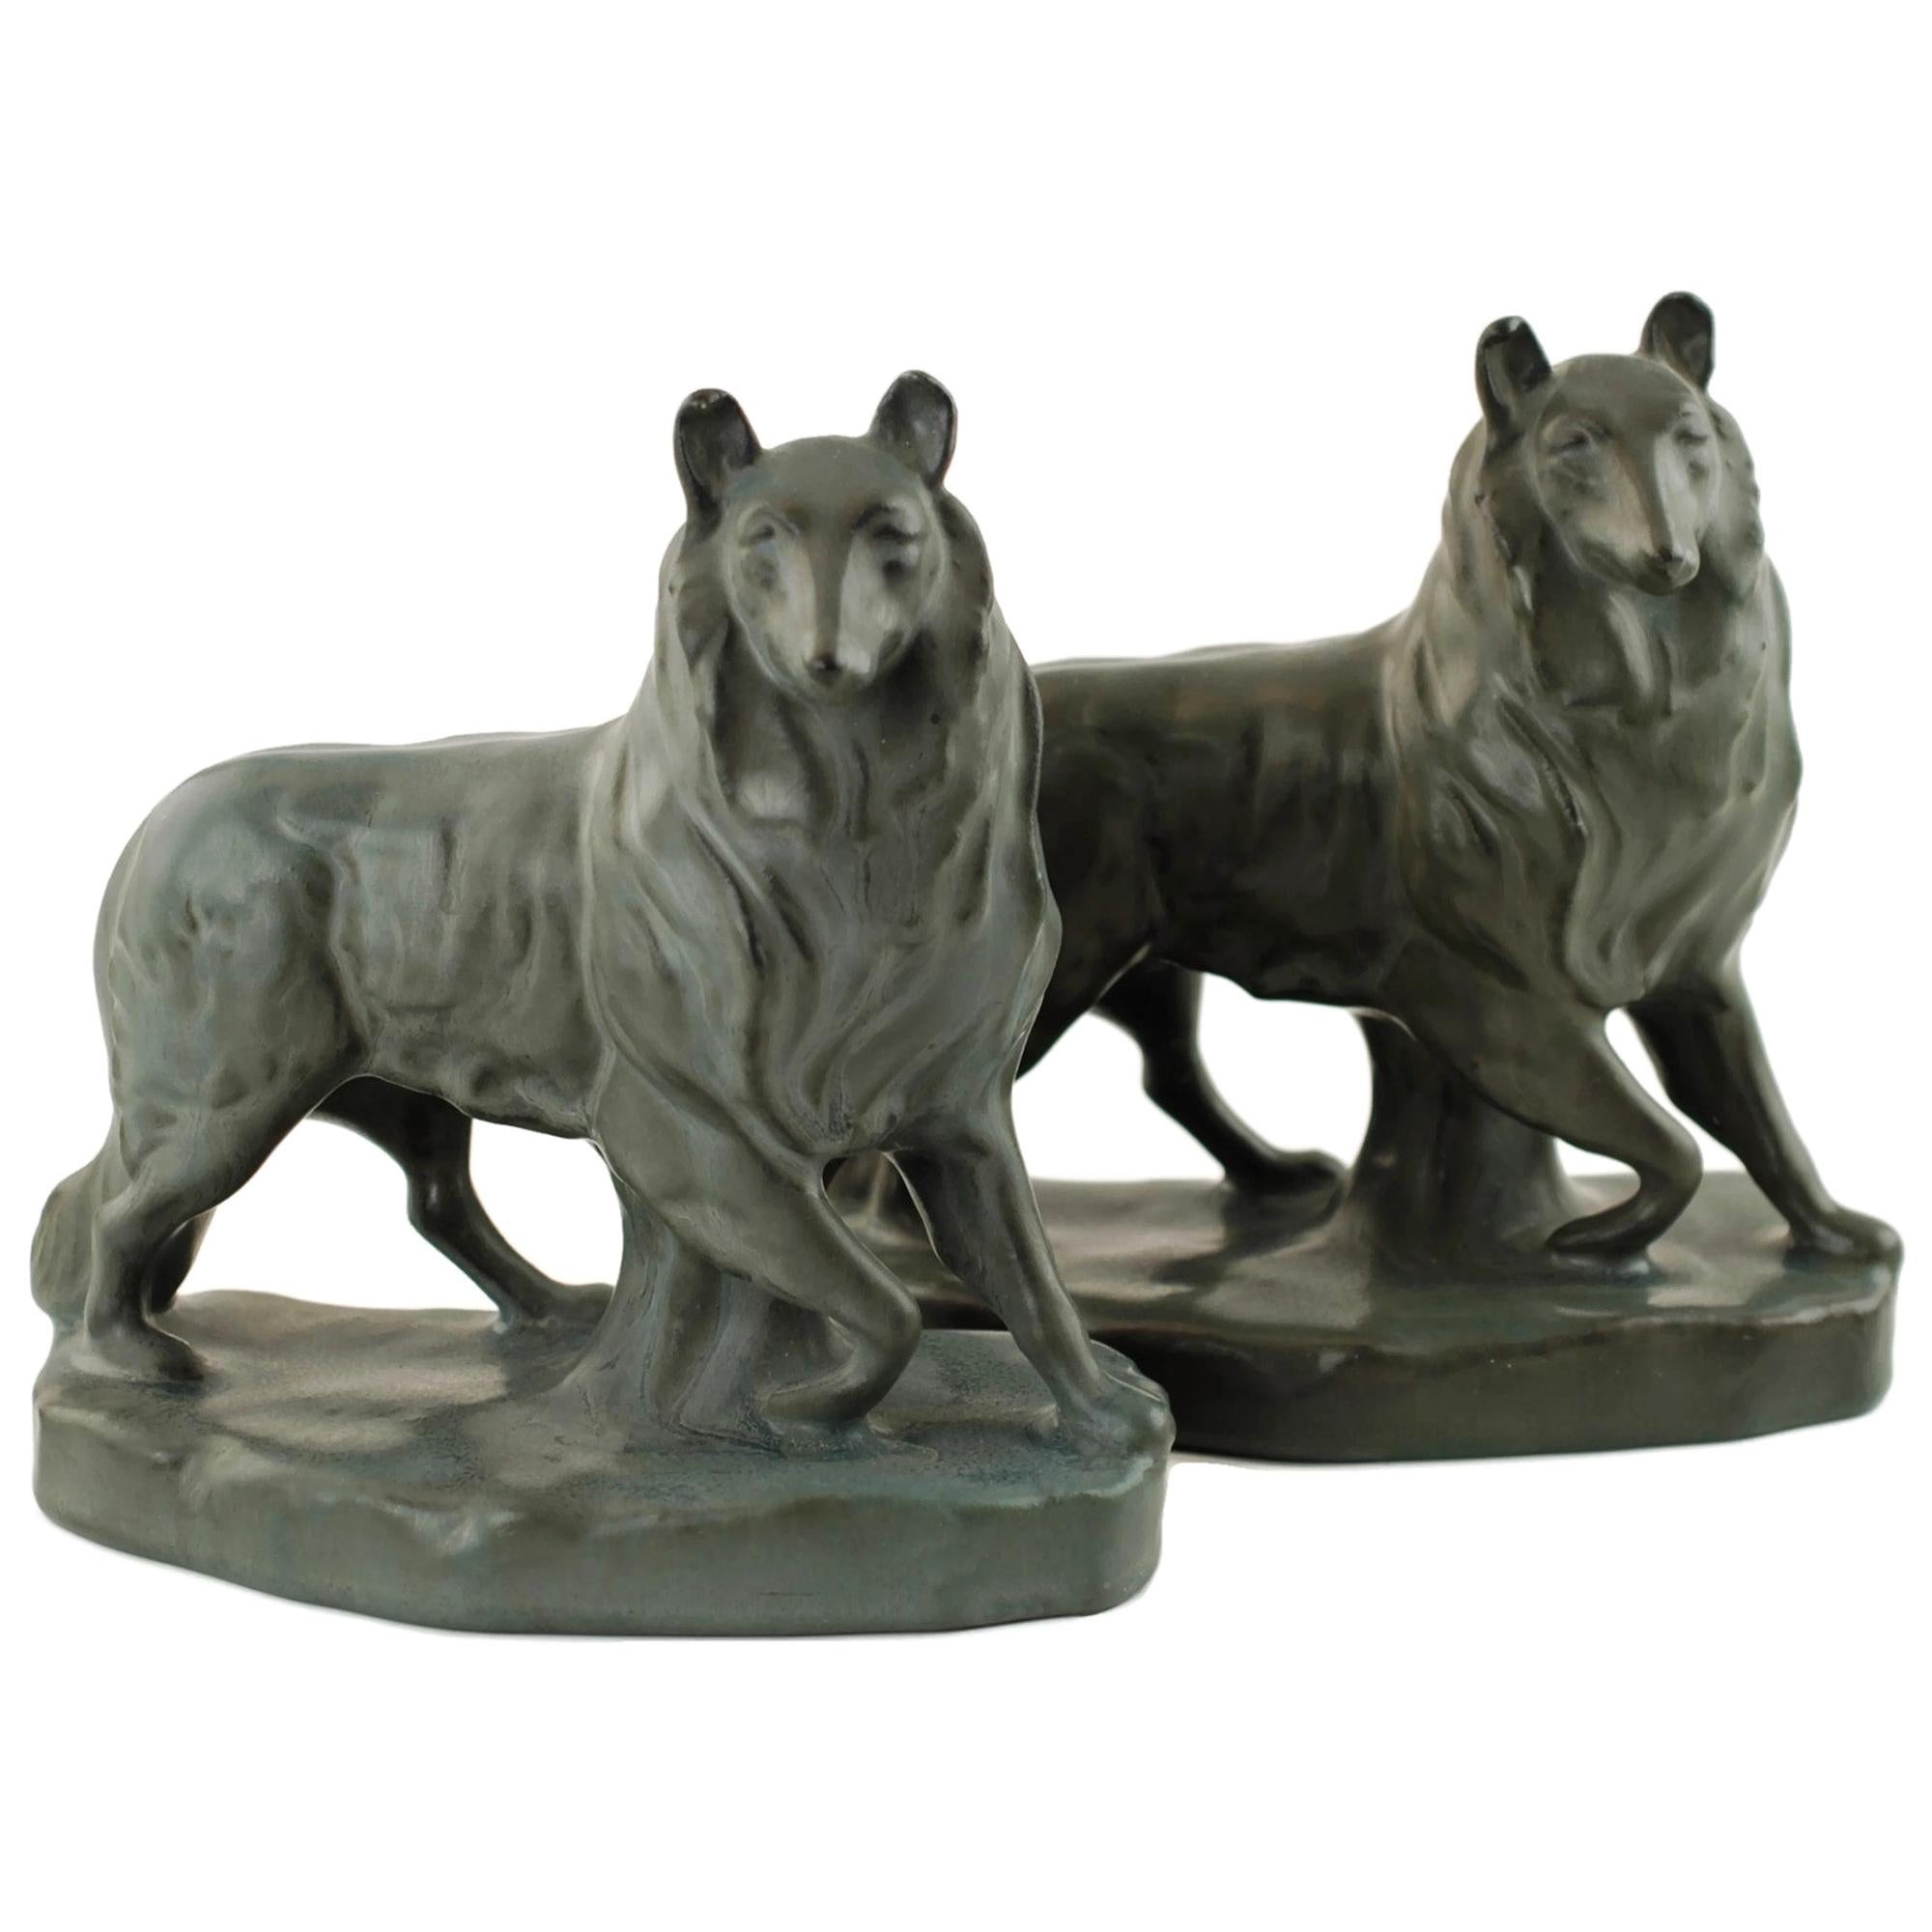 William McDonald for Rookwood Pottery Collie Dog Bookends, circa 1926